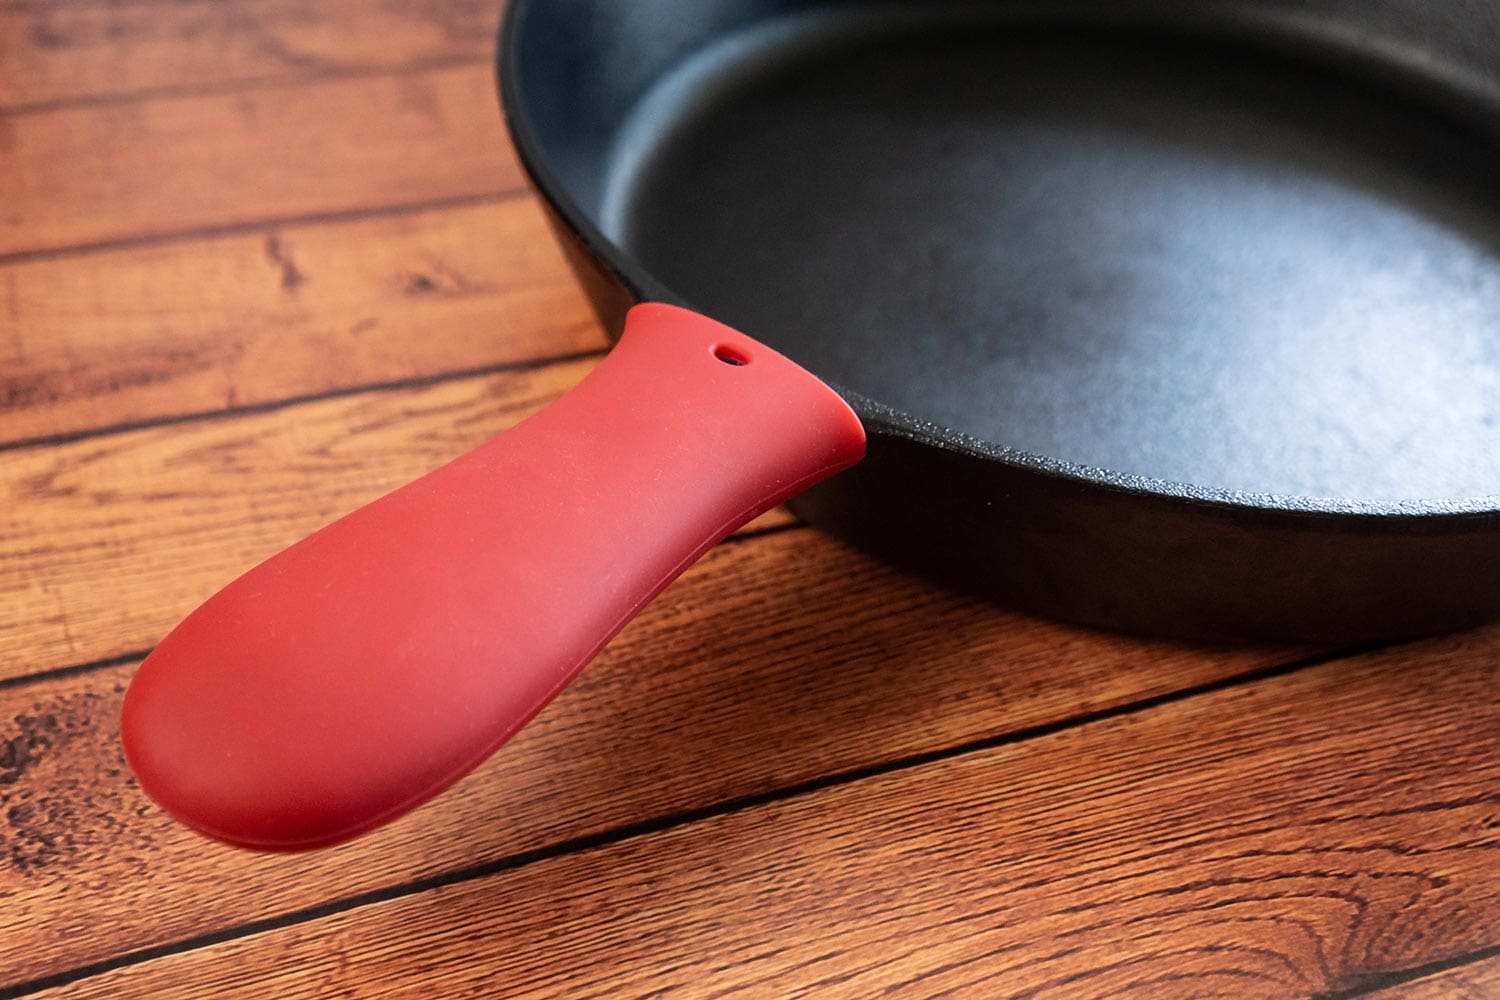 Silicone cover for your cast iron skillet or pan